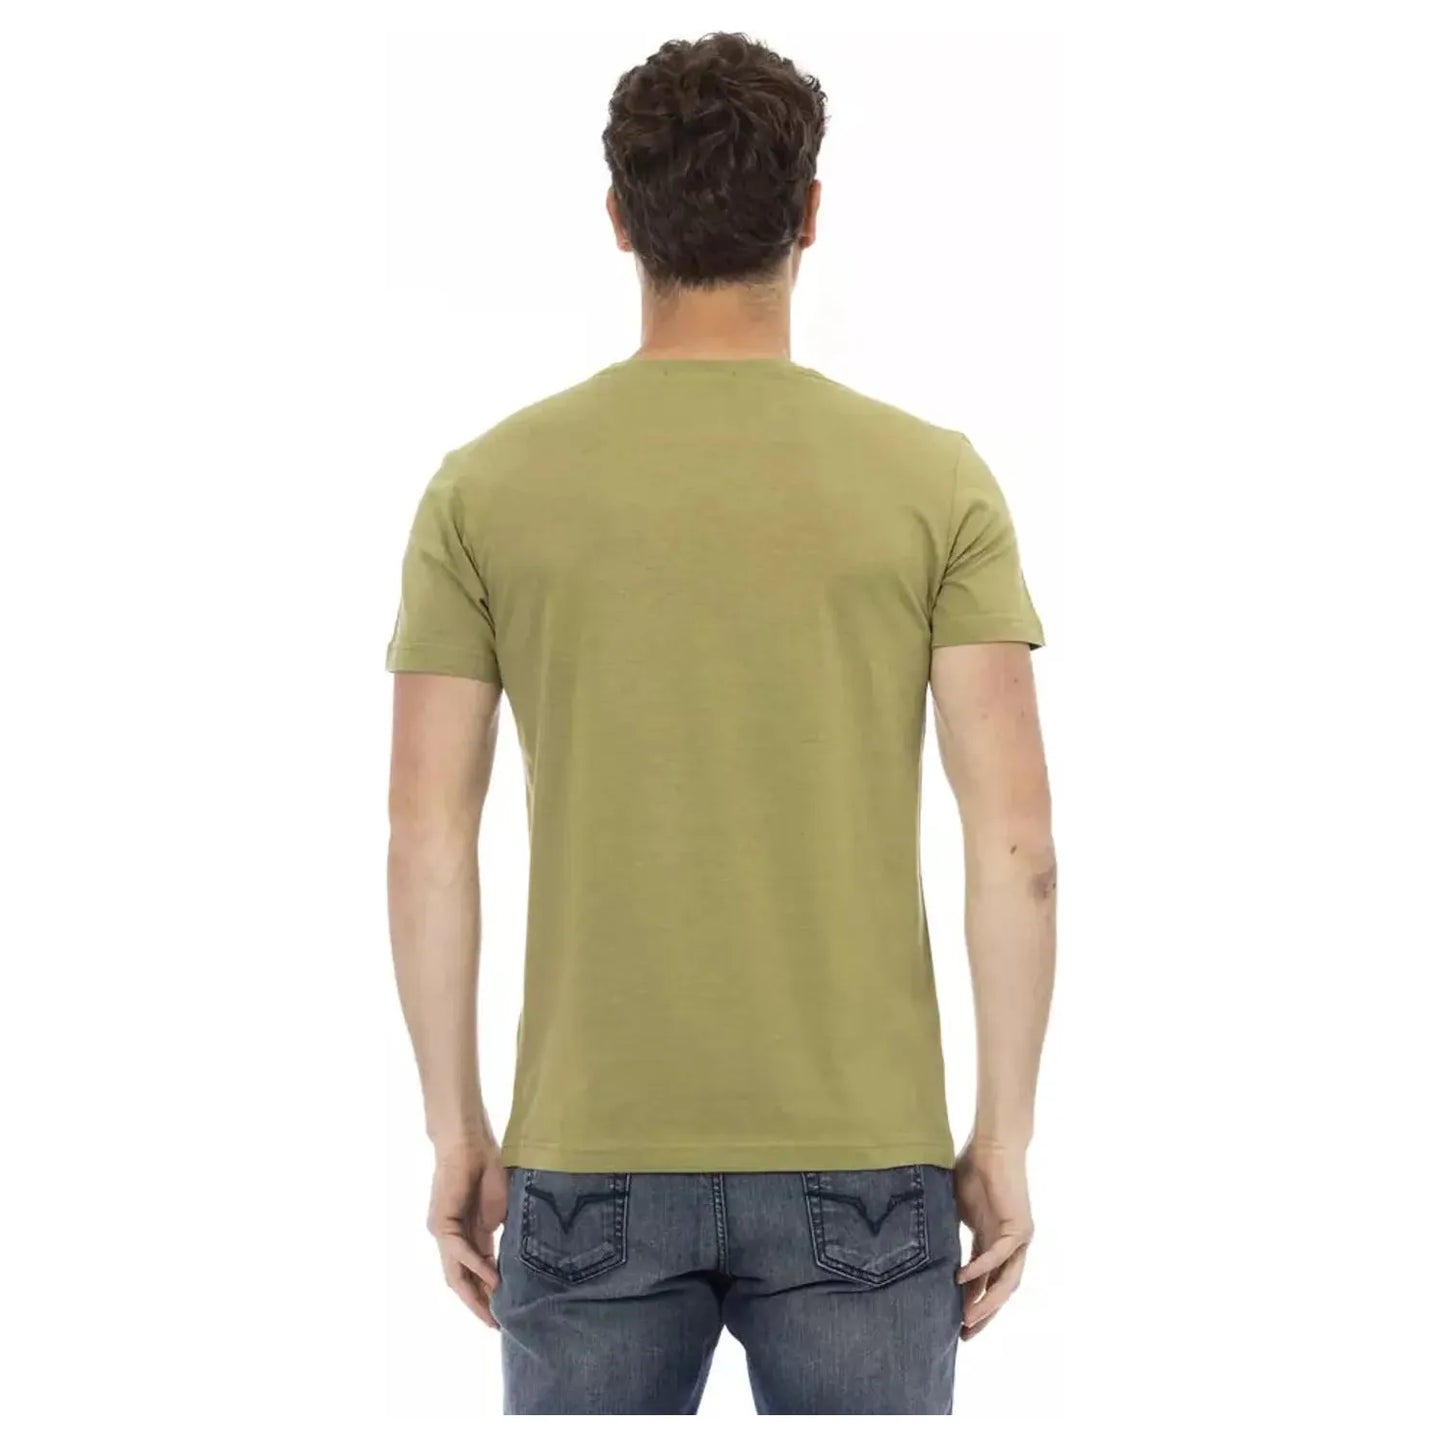 Trussardi Action Chic Green Short Sleeve Tee with Front Print green-cotton-t-shirt-42